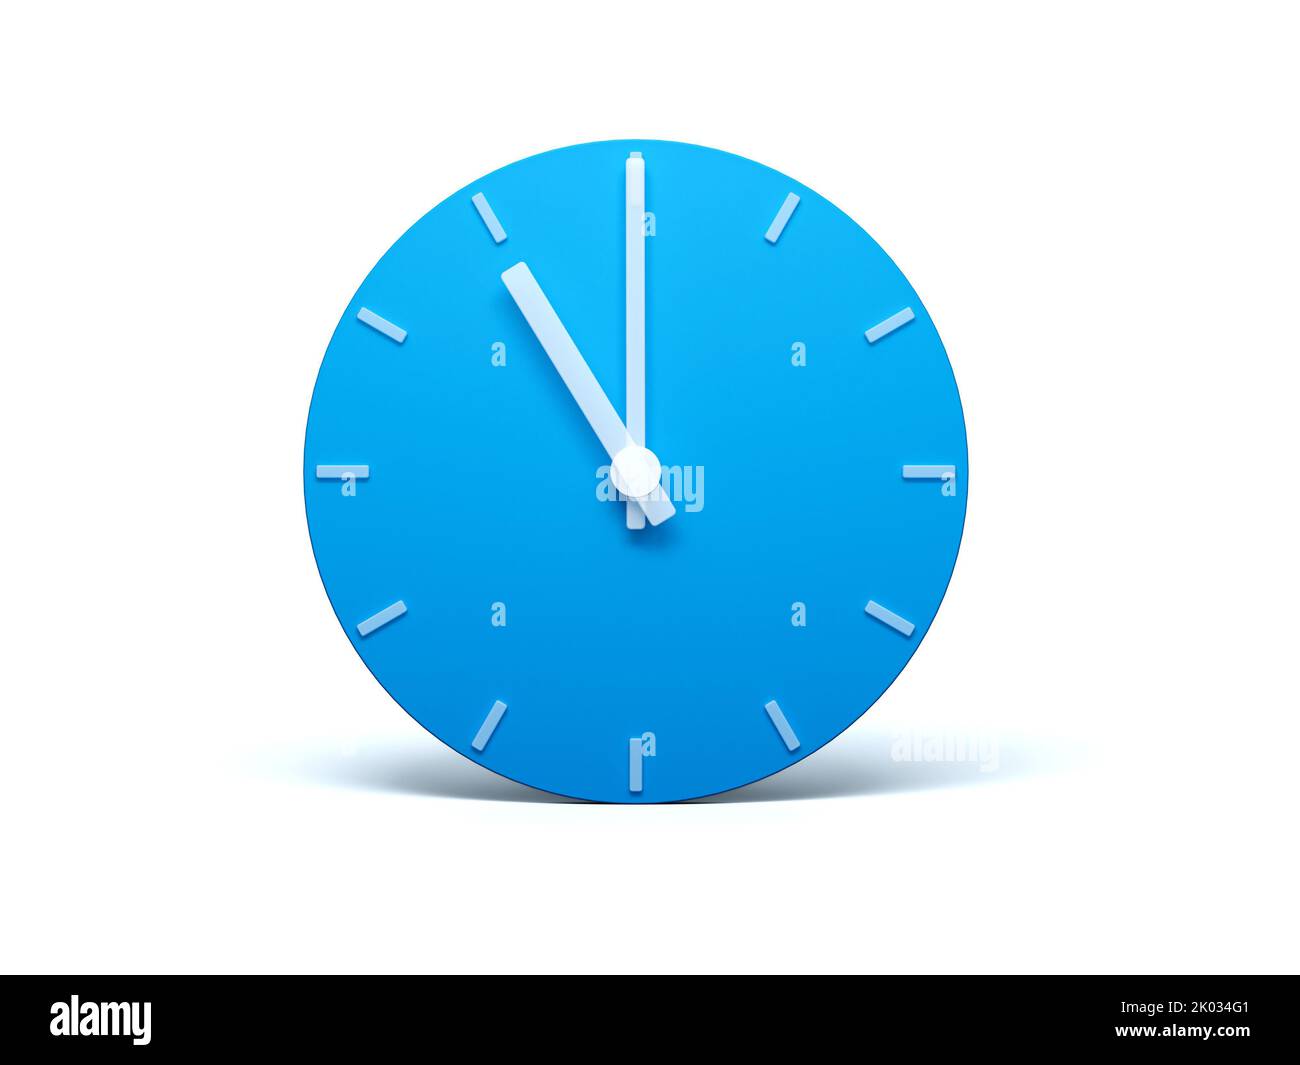 An illustration of eleven o'clock blue wall clock isolated on a white background Stock Photo